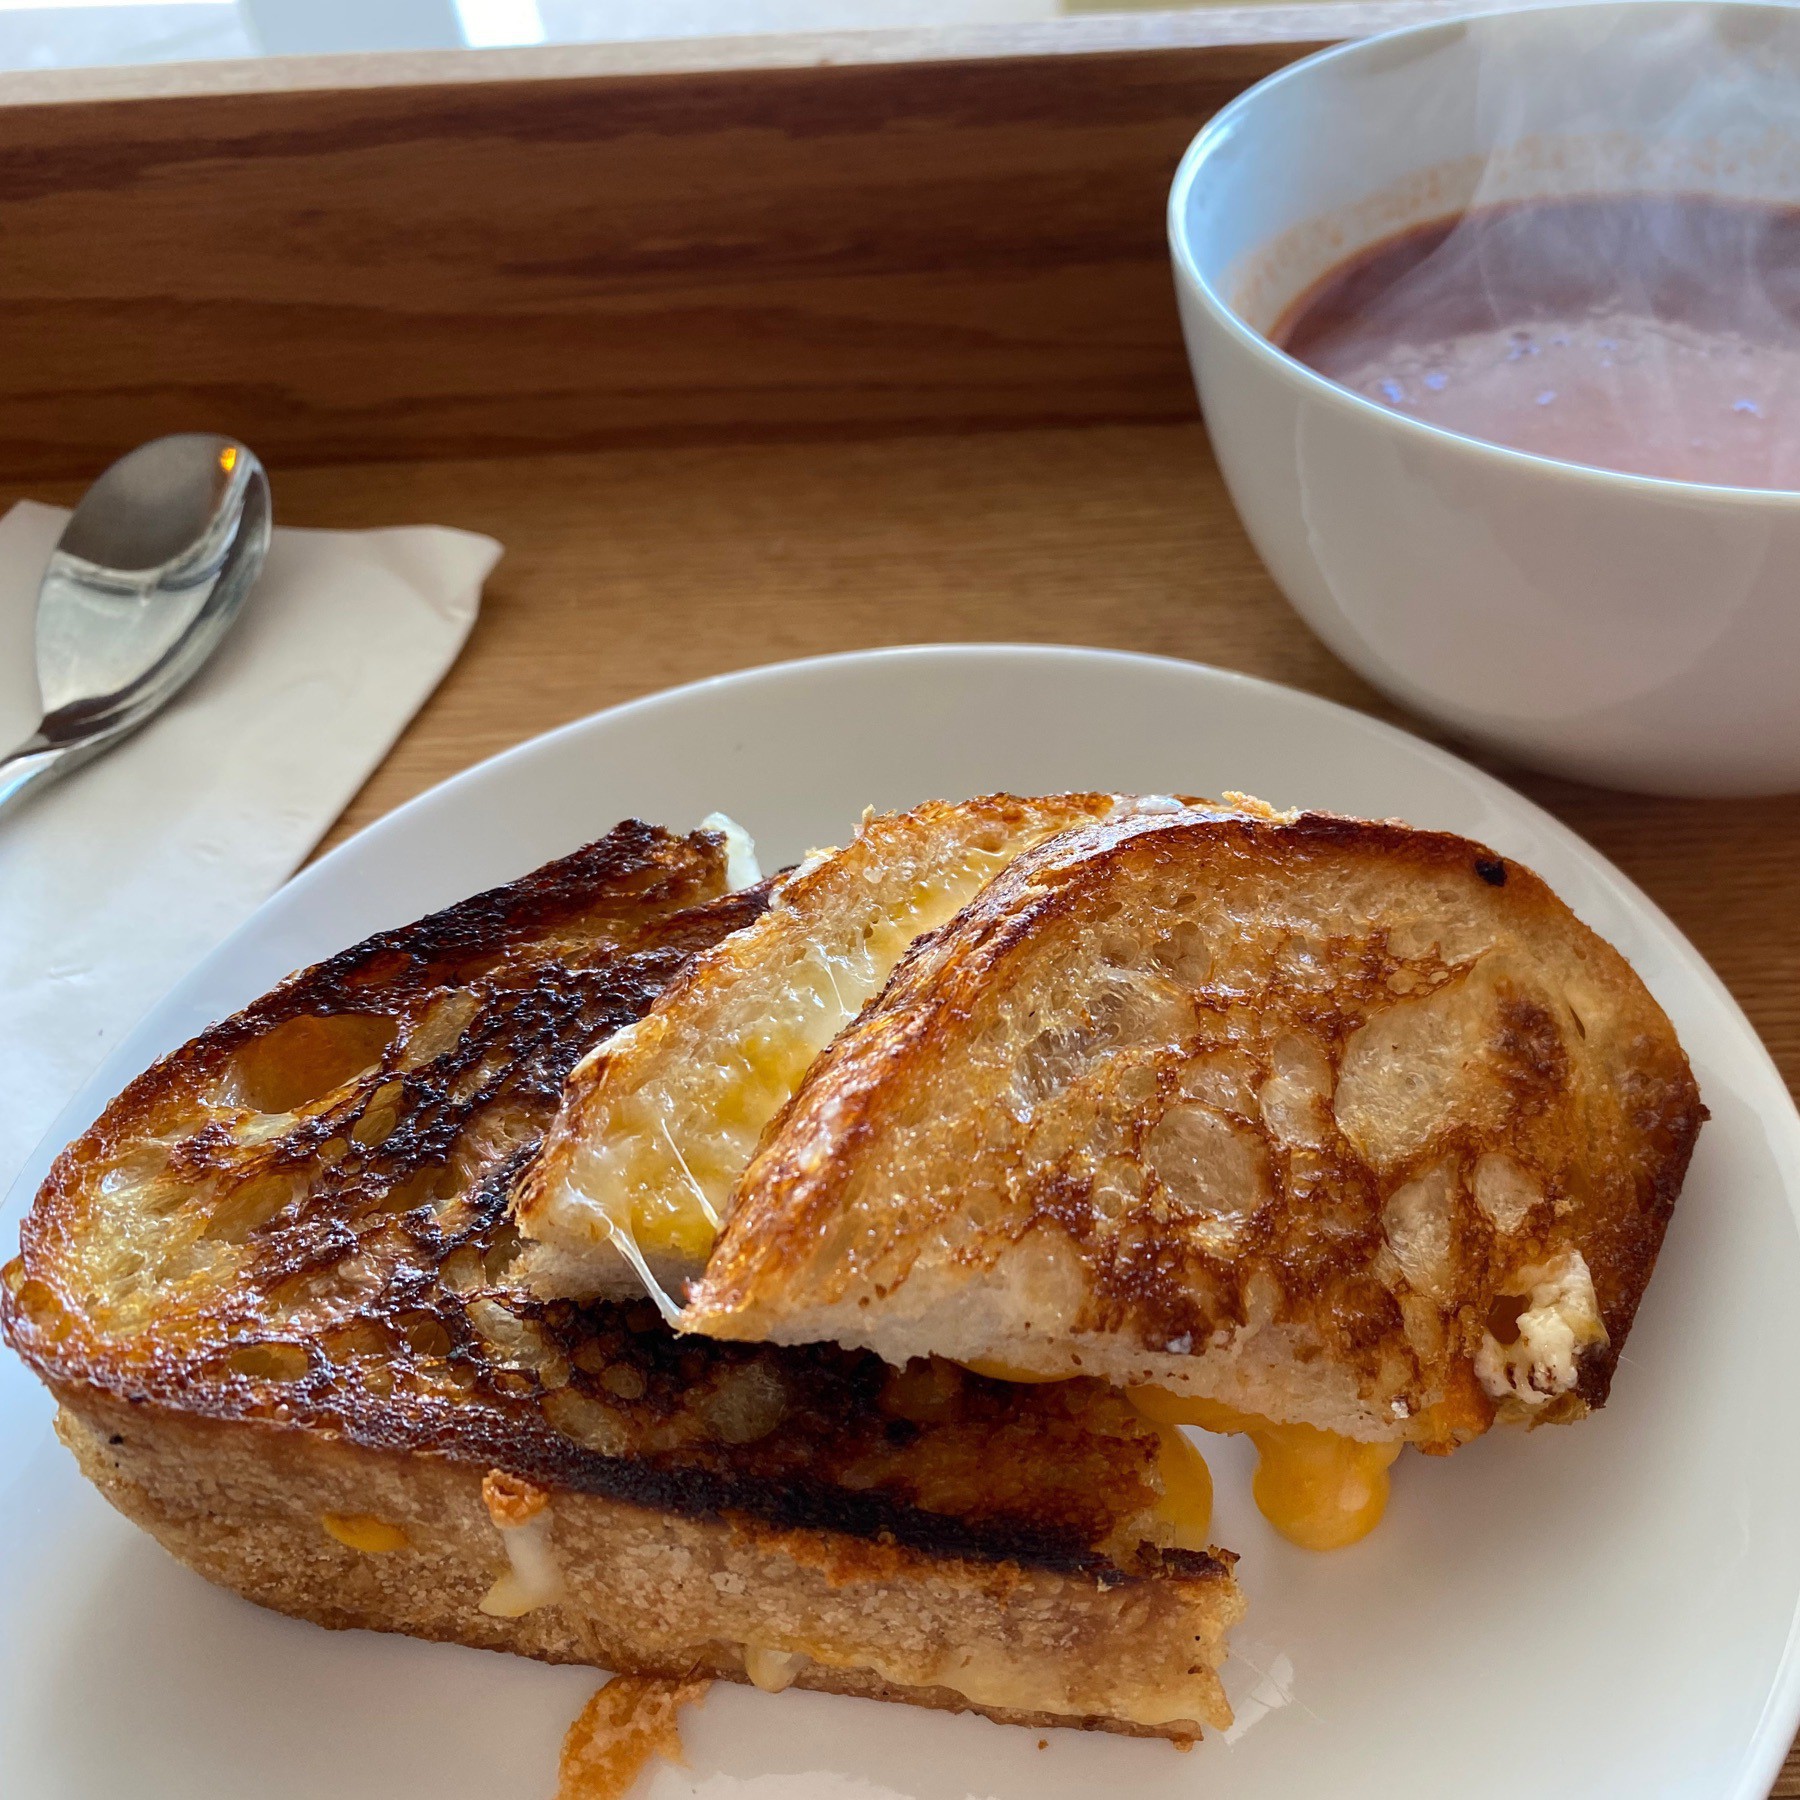 Grilled cheese in plate with bowl of tomato soup in background.